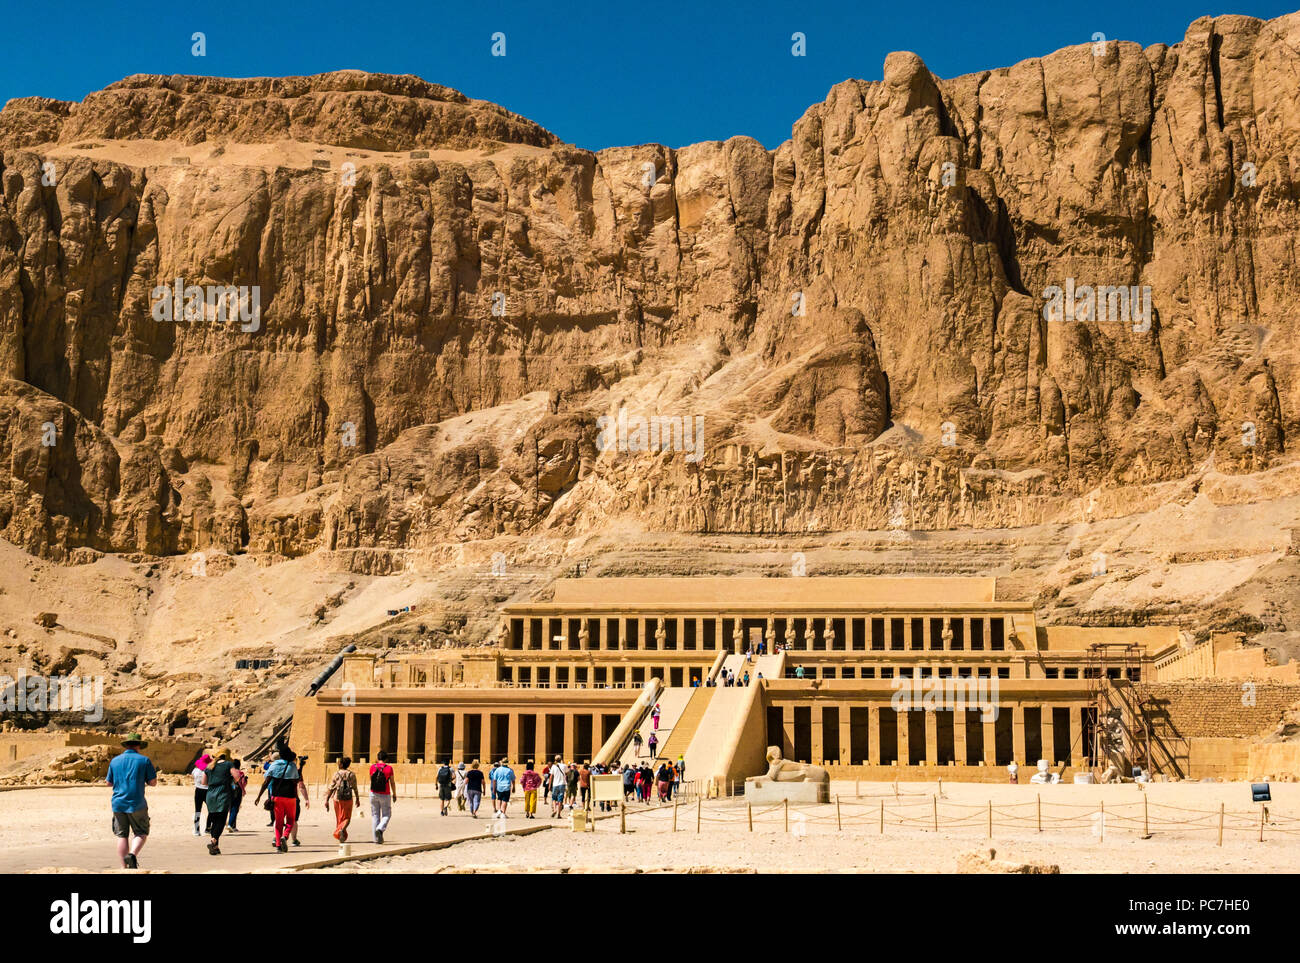 Tourists at Mortuary Temple of Hatshepsut, Valley of Kings, Luxor, Egypt, Africa Stock Photo